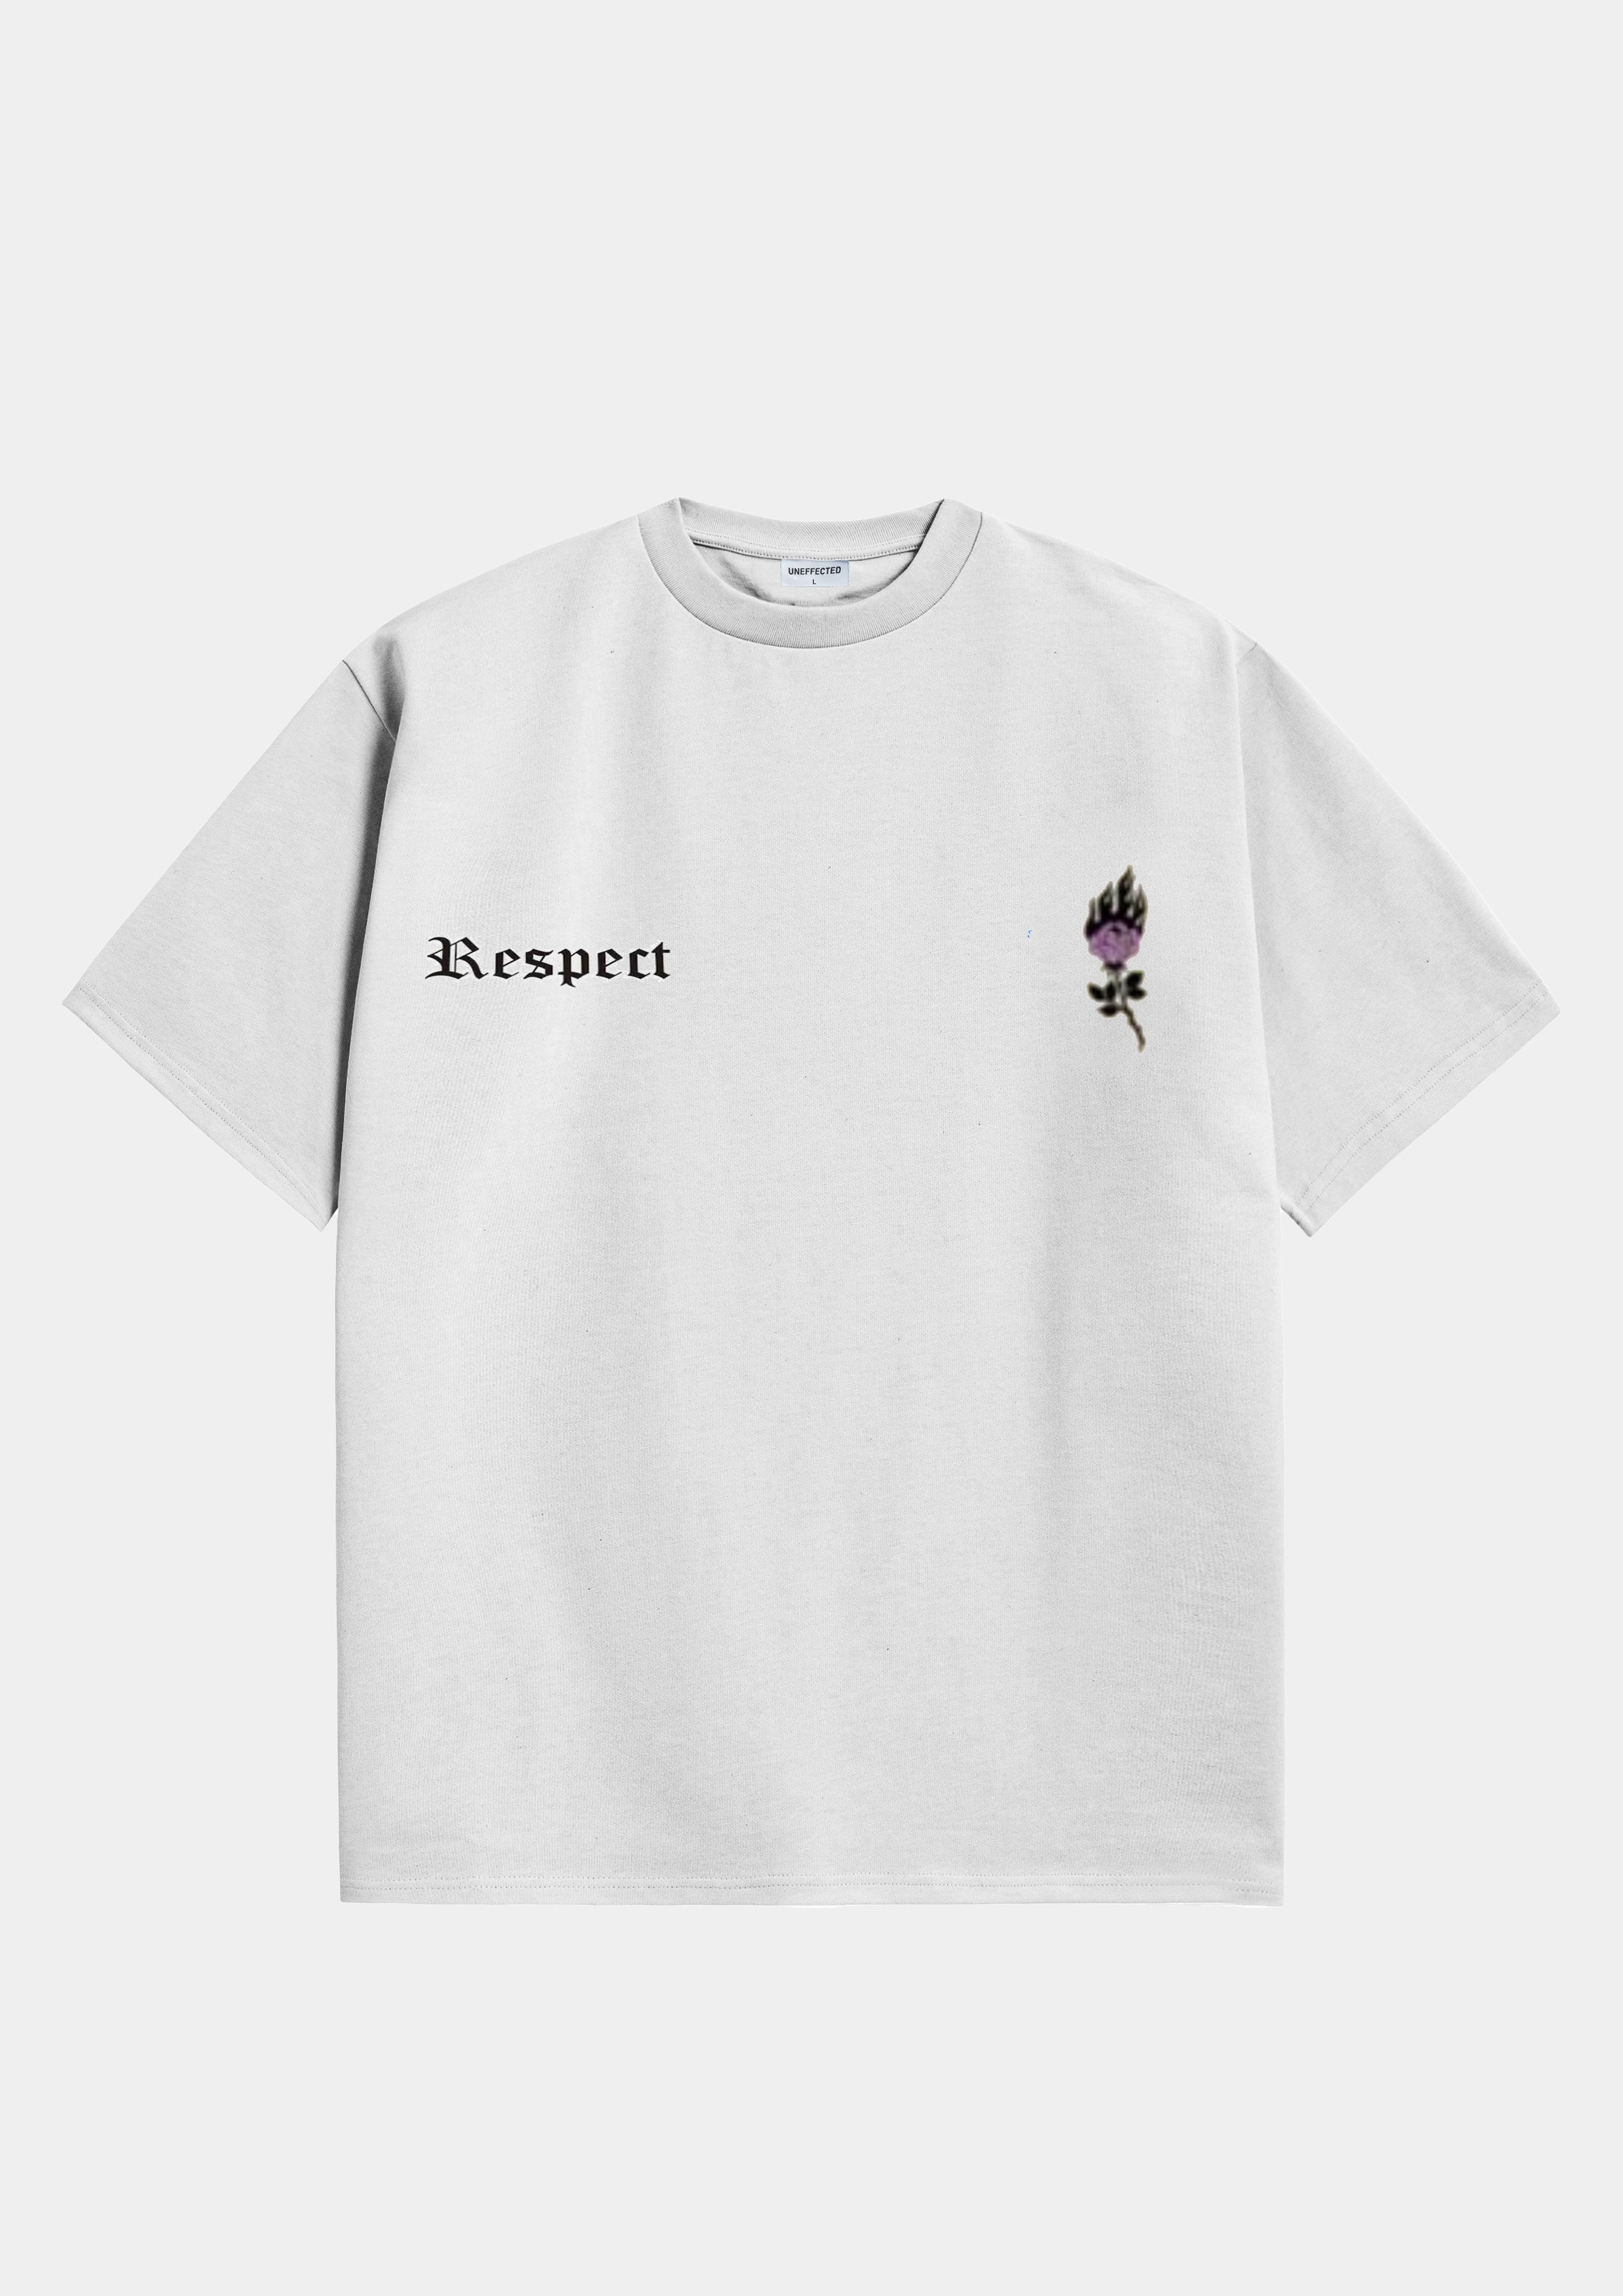 Respect Relaxed Fit Premium Tee White - UNEFFECTED STUDIOS® - T - shirt - UNEFFECTED